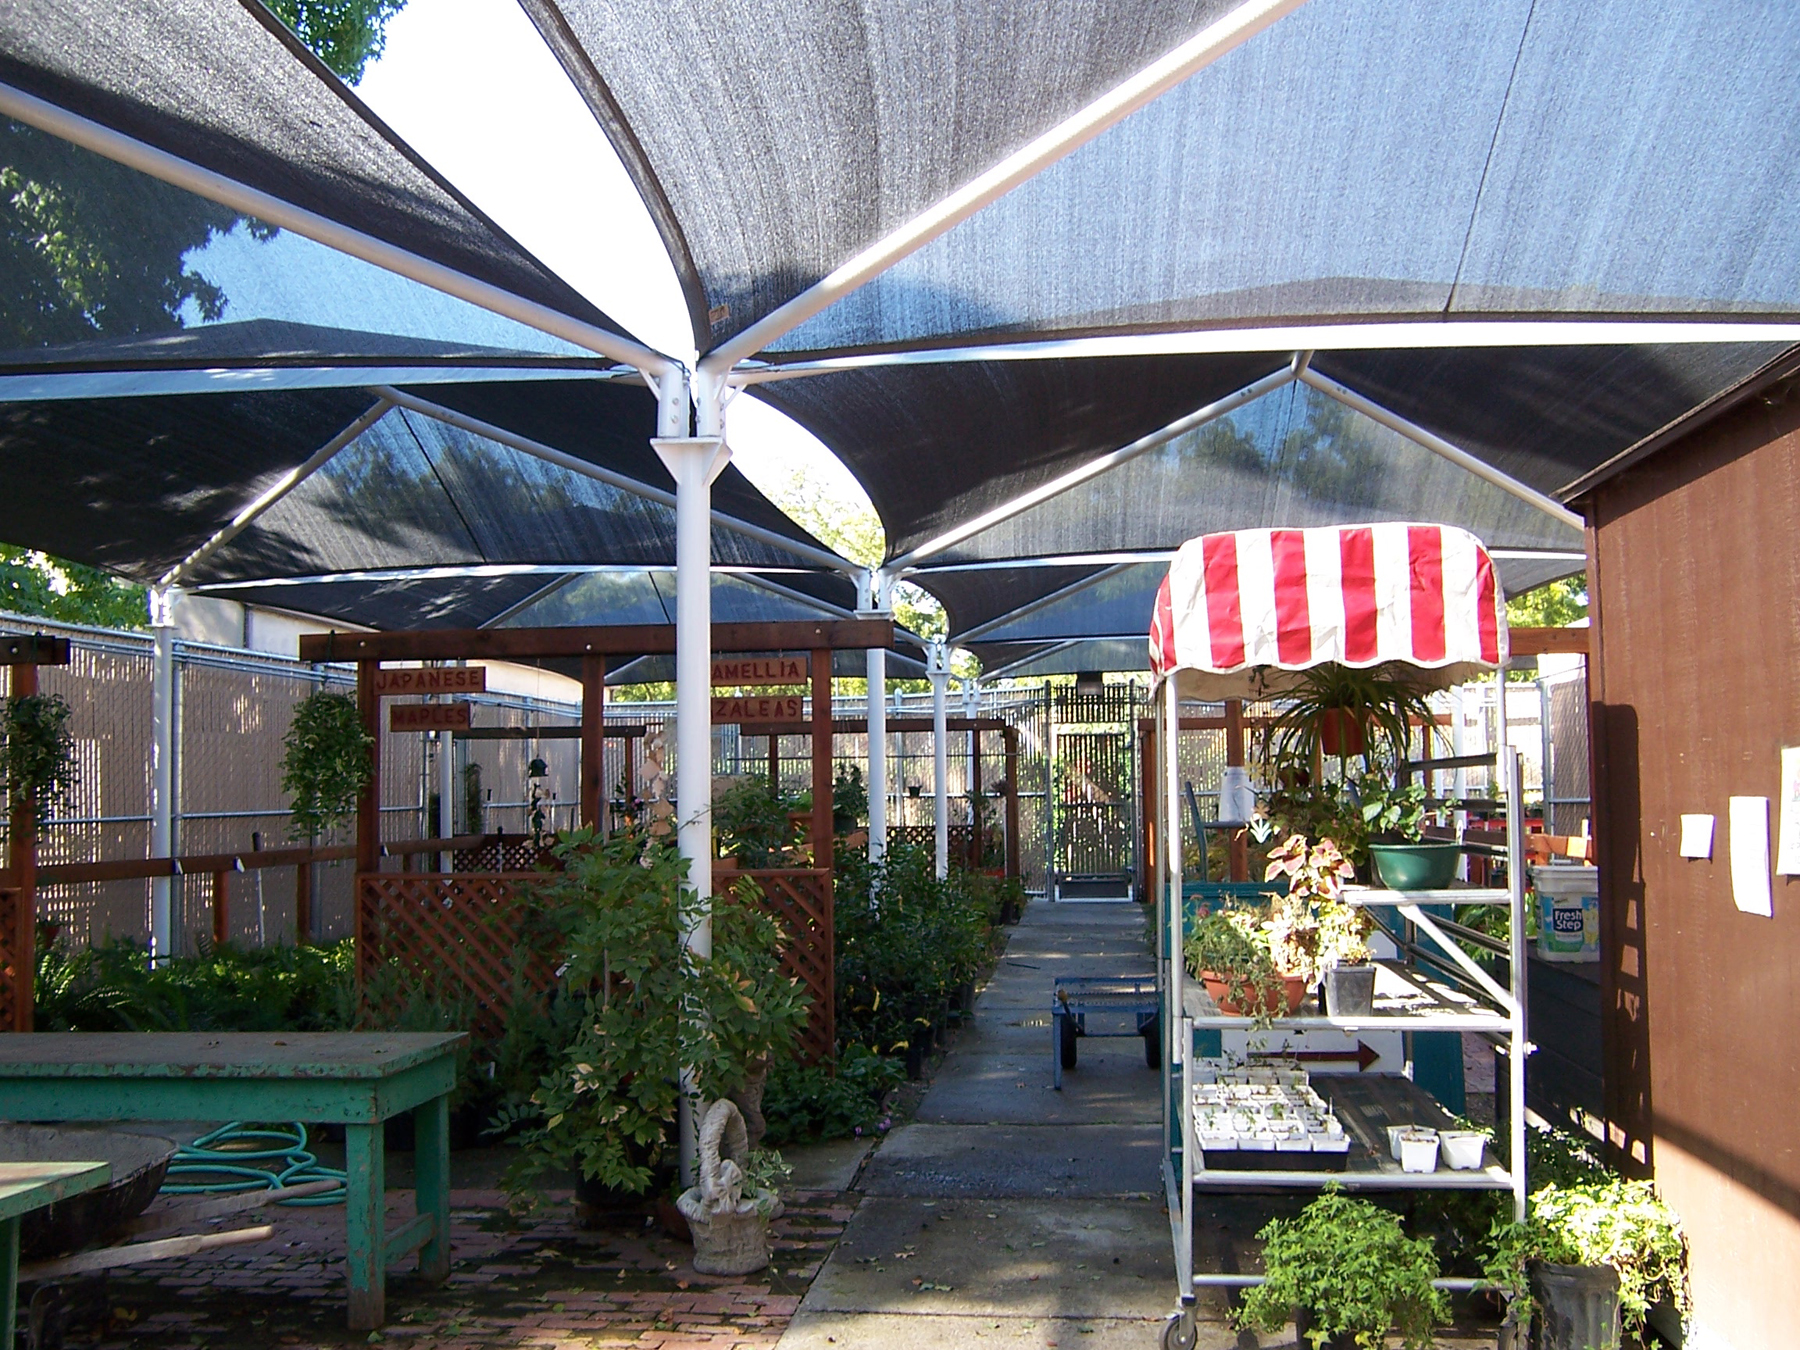 usa shade structures covering green house plants